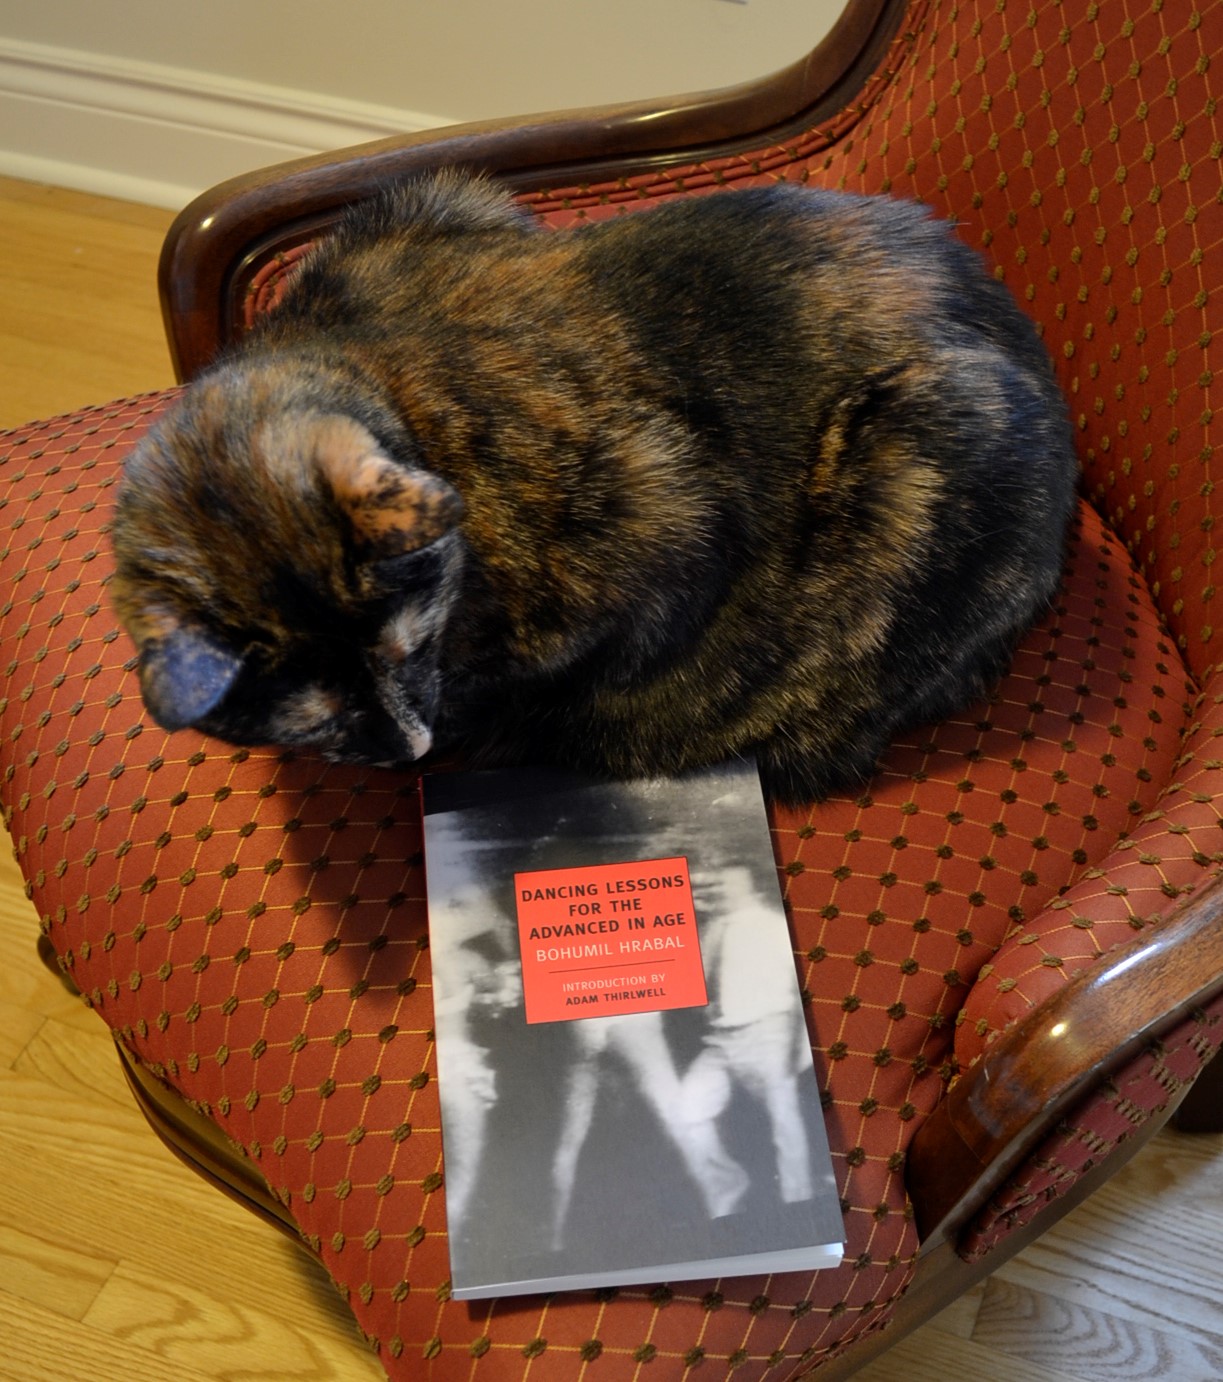 A tortoiseshell cat looks at a book with a black-and-white cover. In a red box, the title is seen as Dancing Lessons for the Advanced in Age.